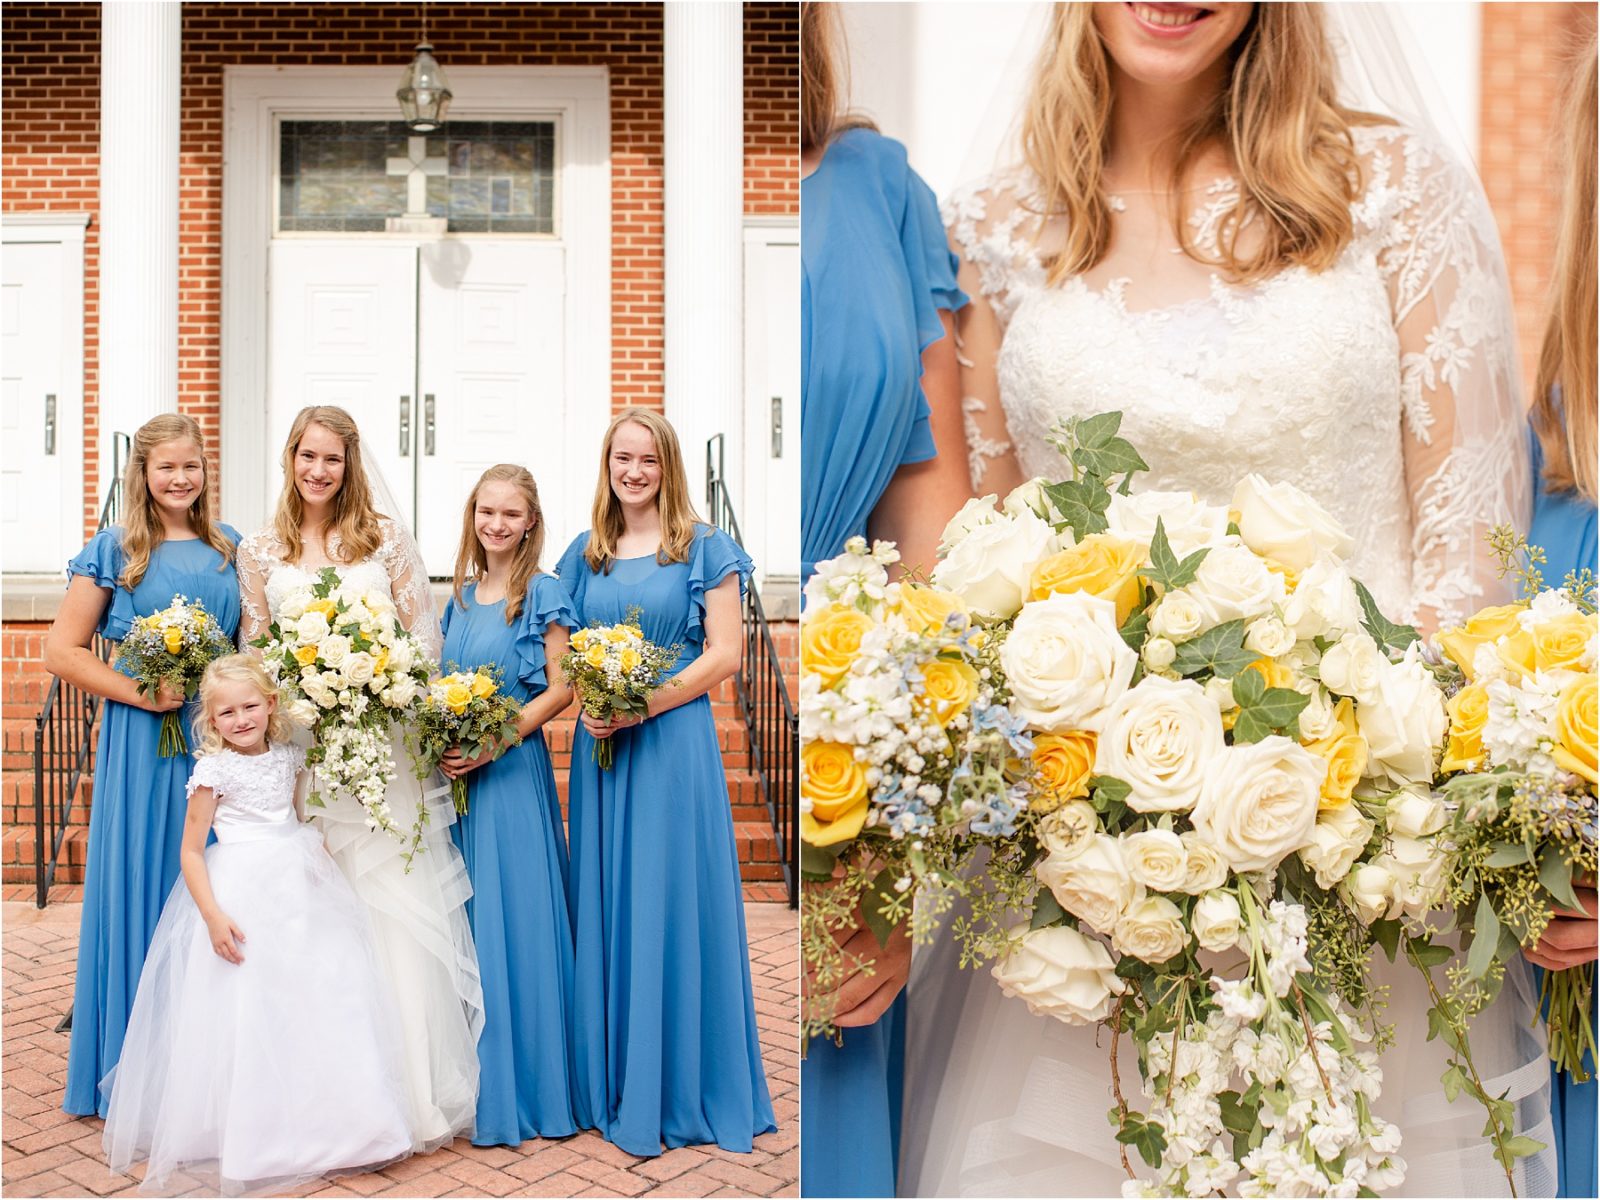 Bride stands with women in blue dresses